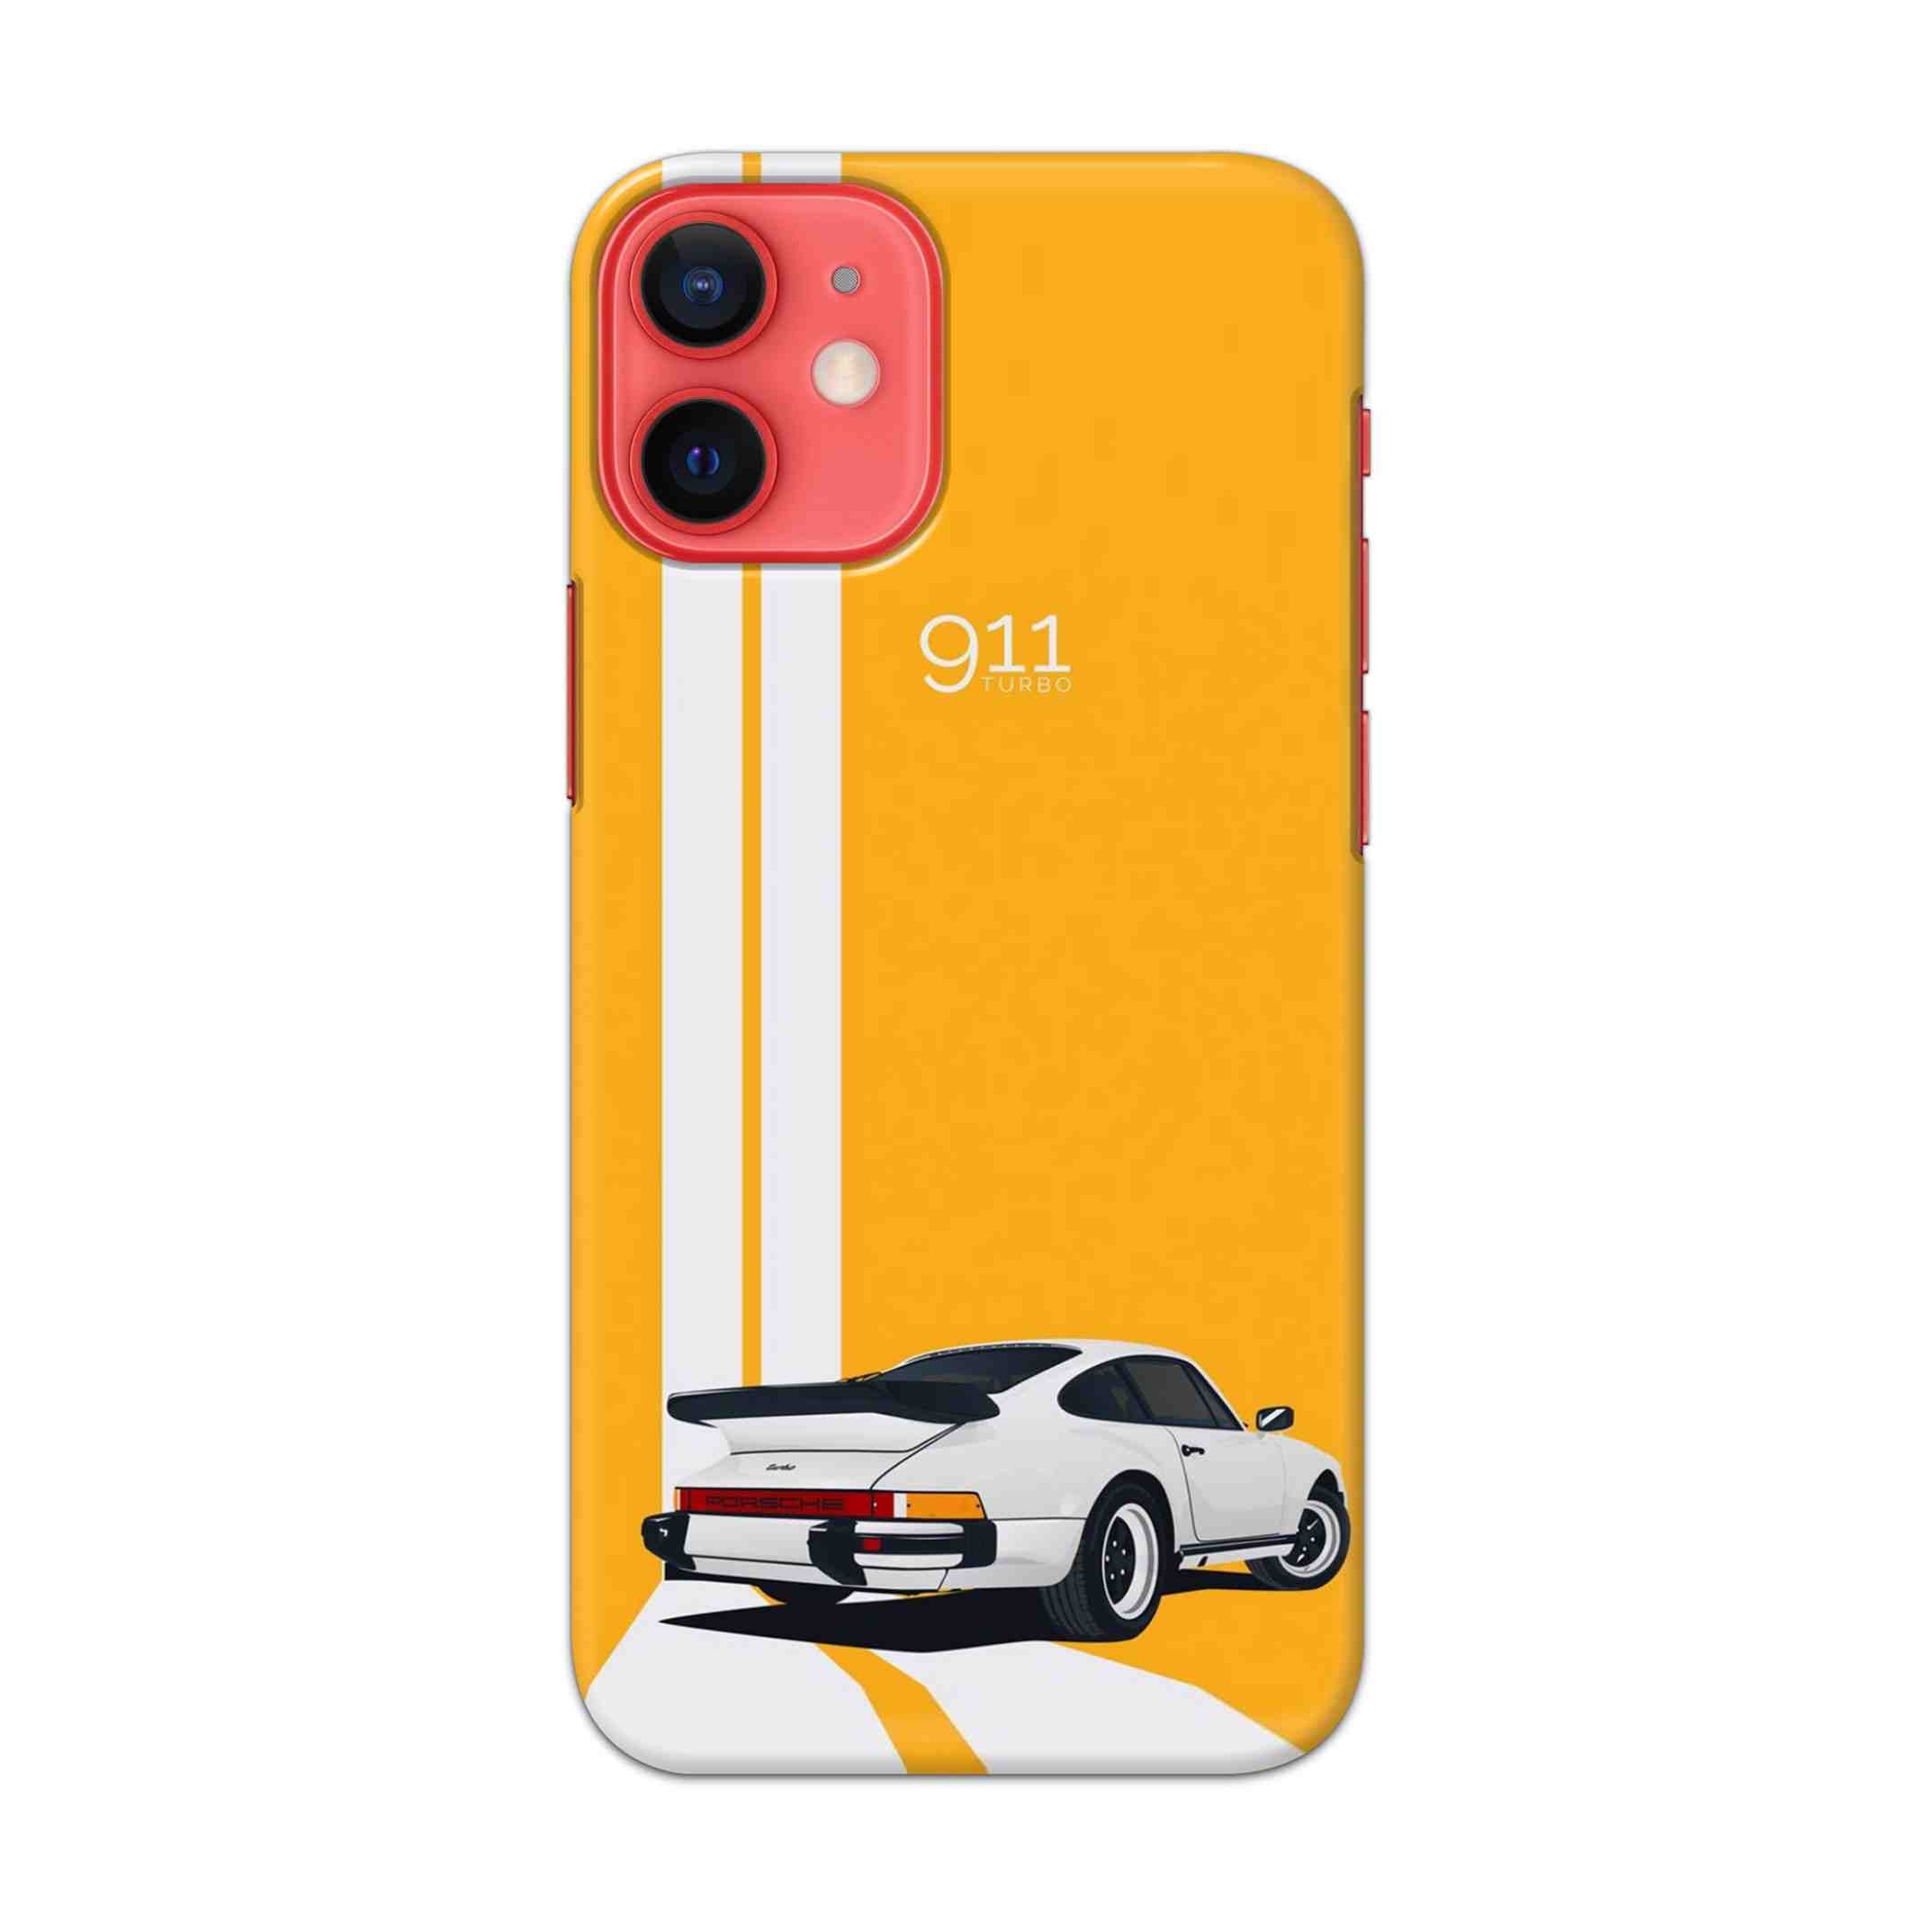 Buy 911 Gt Porche Hard Back Mobile Phone Case/Cover For Apple iPhone 12 mini Online